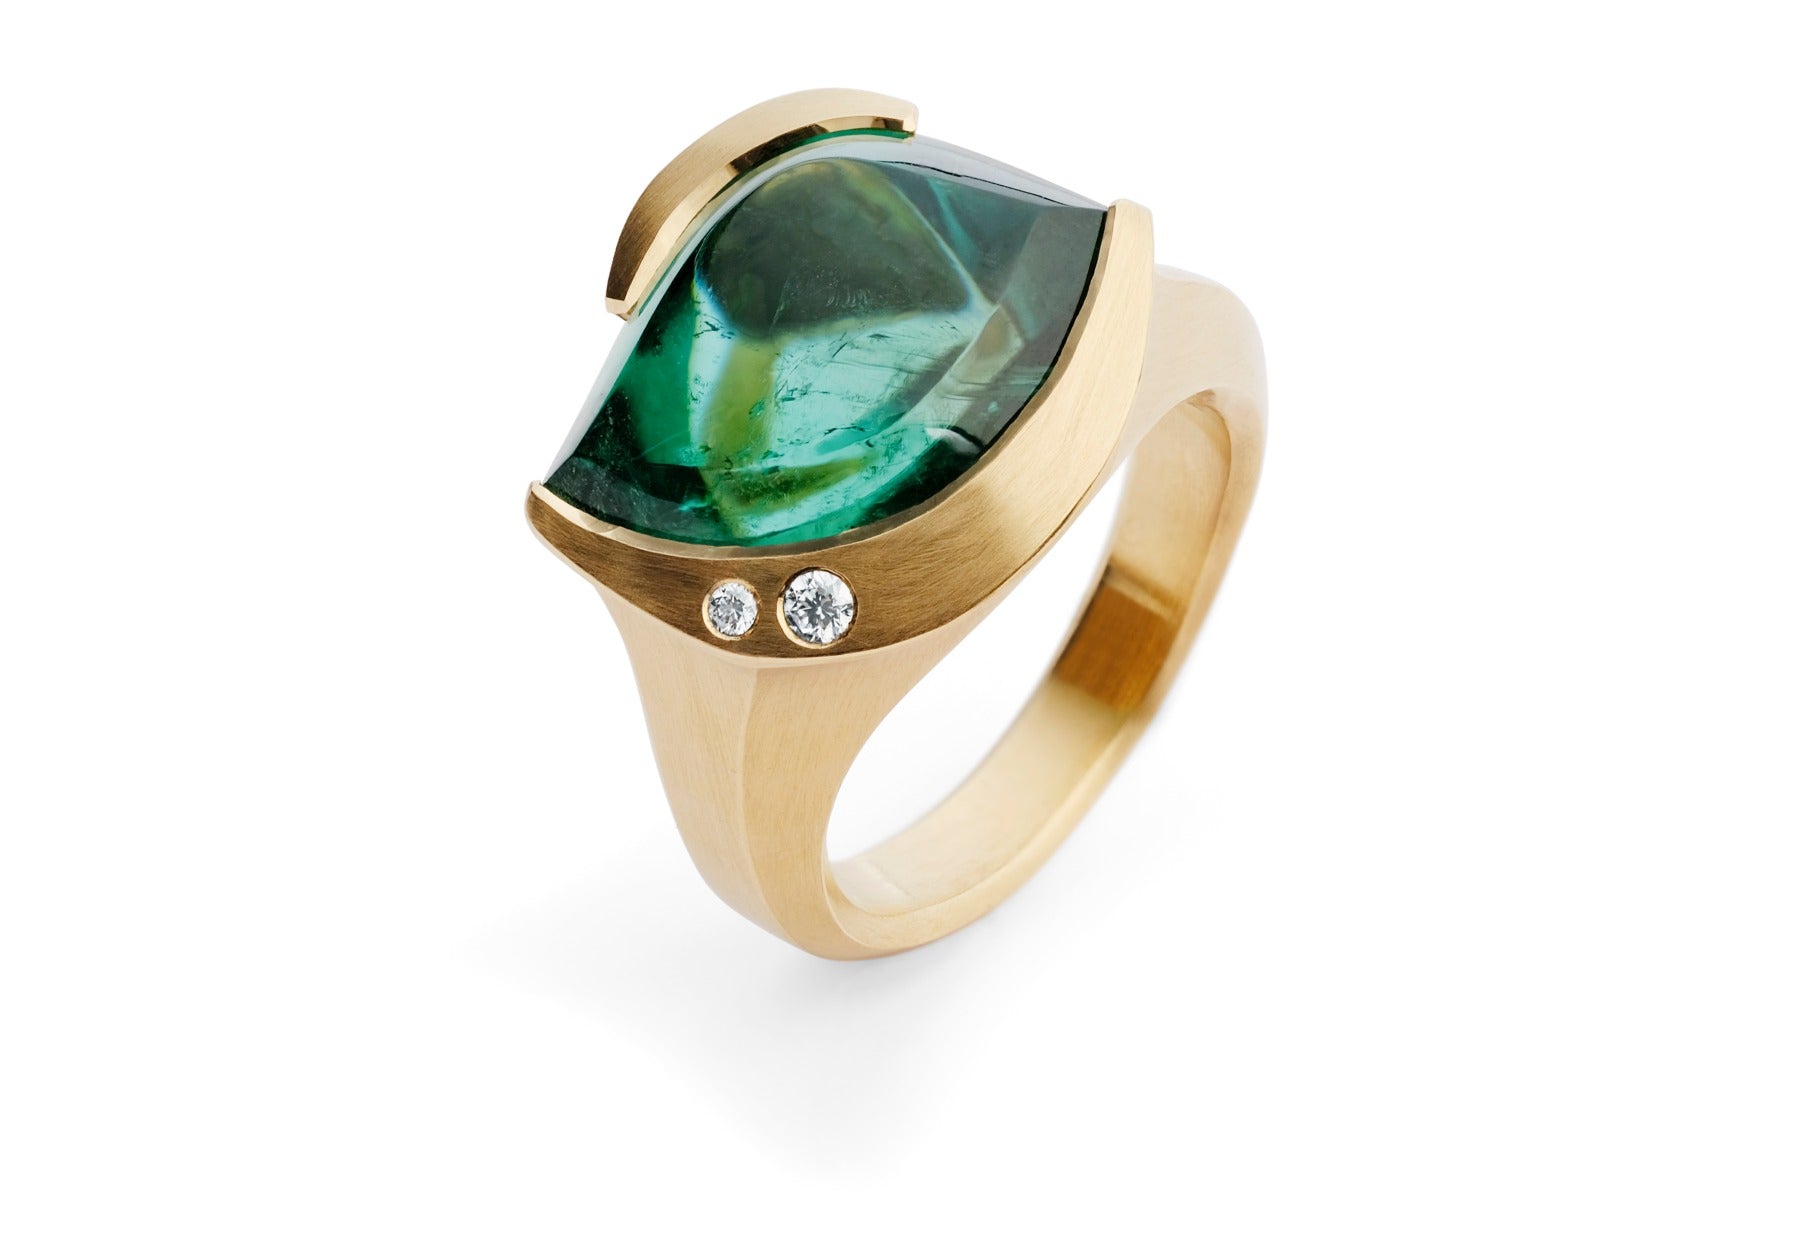 Arris carved green tourmaline and white diamond rose gold ring